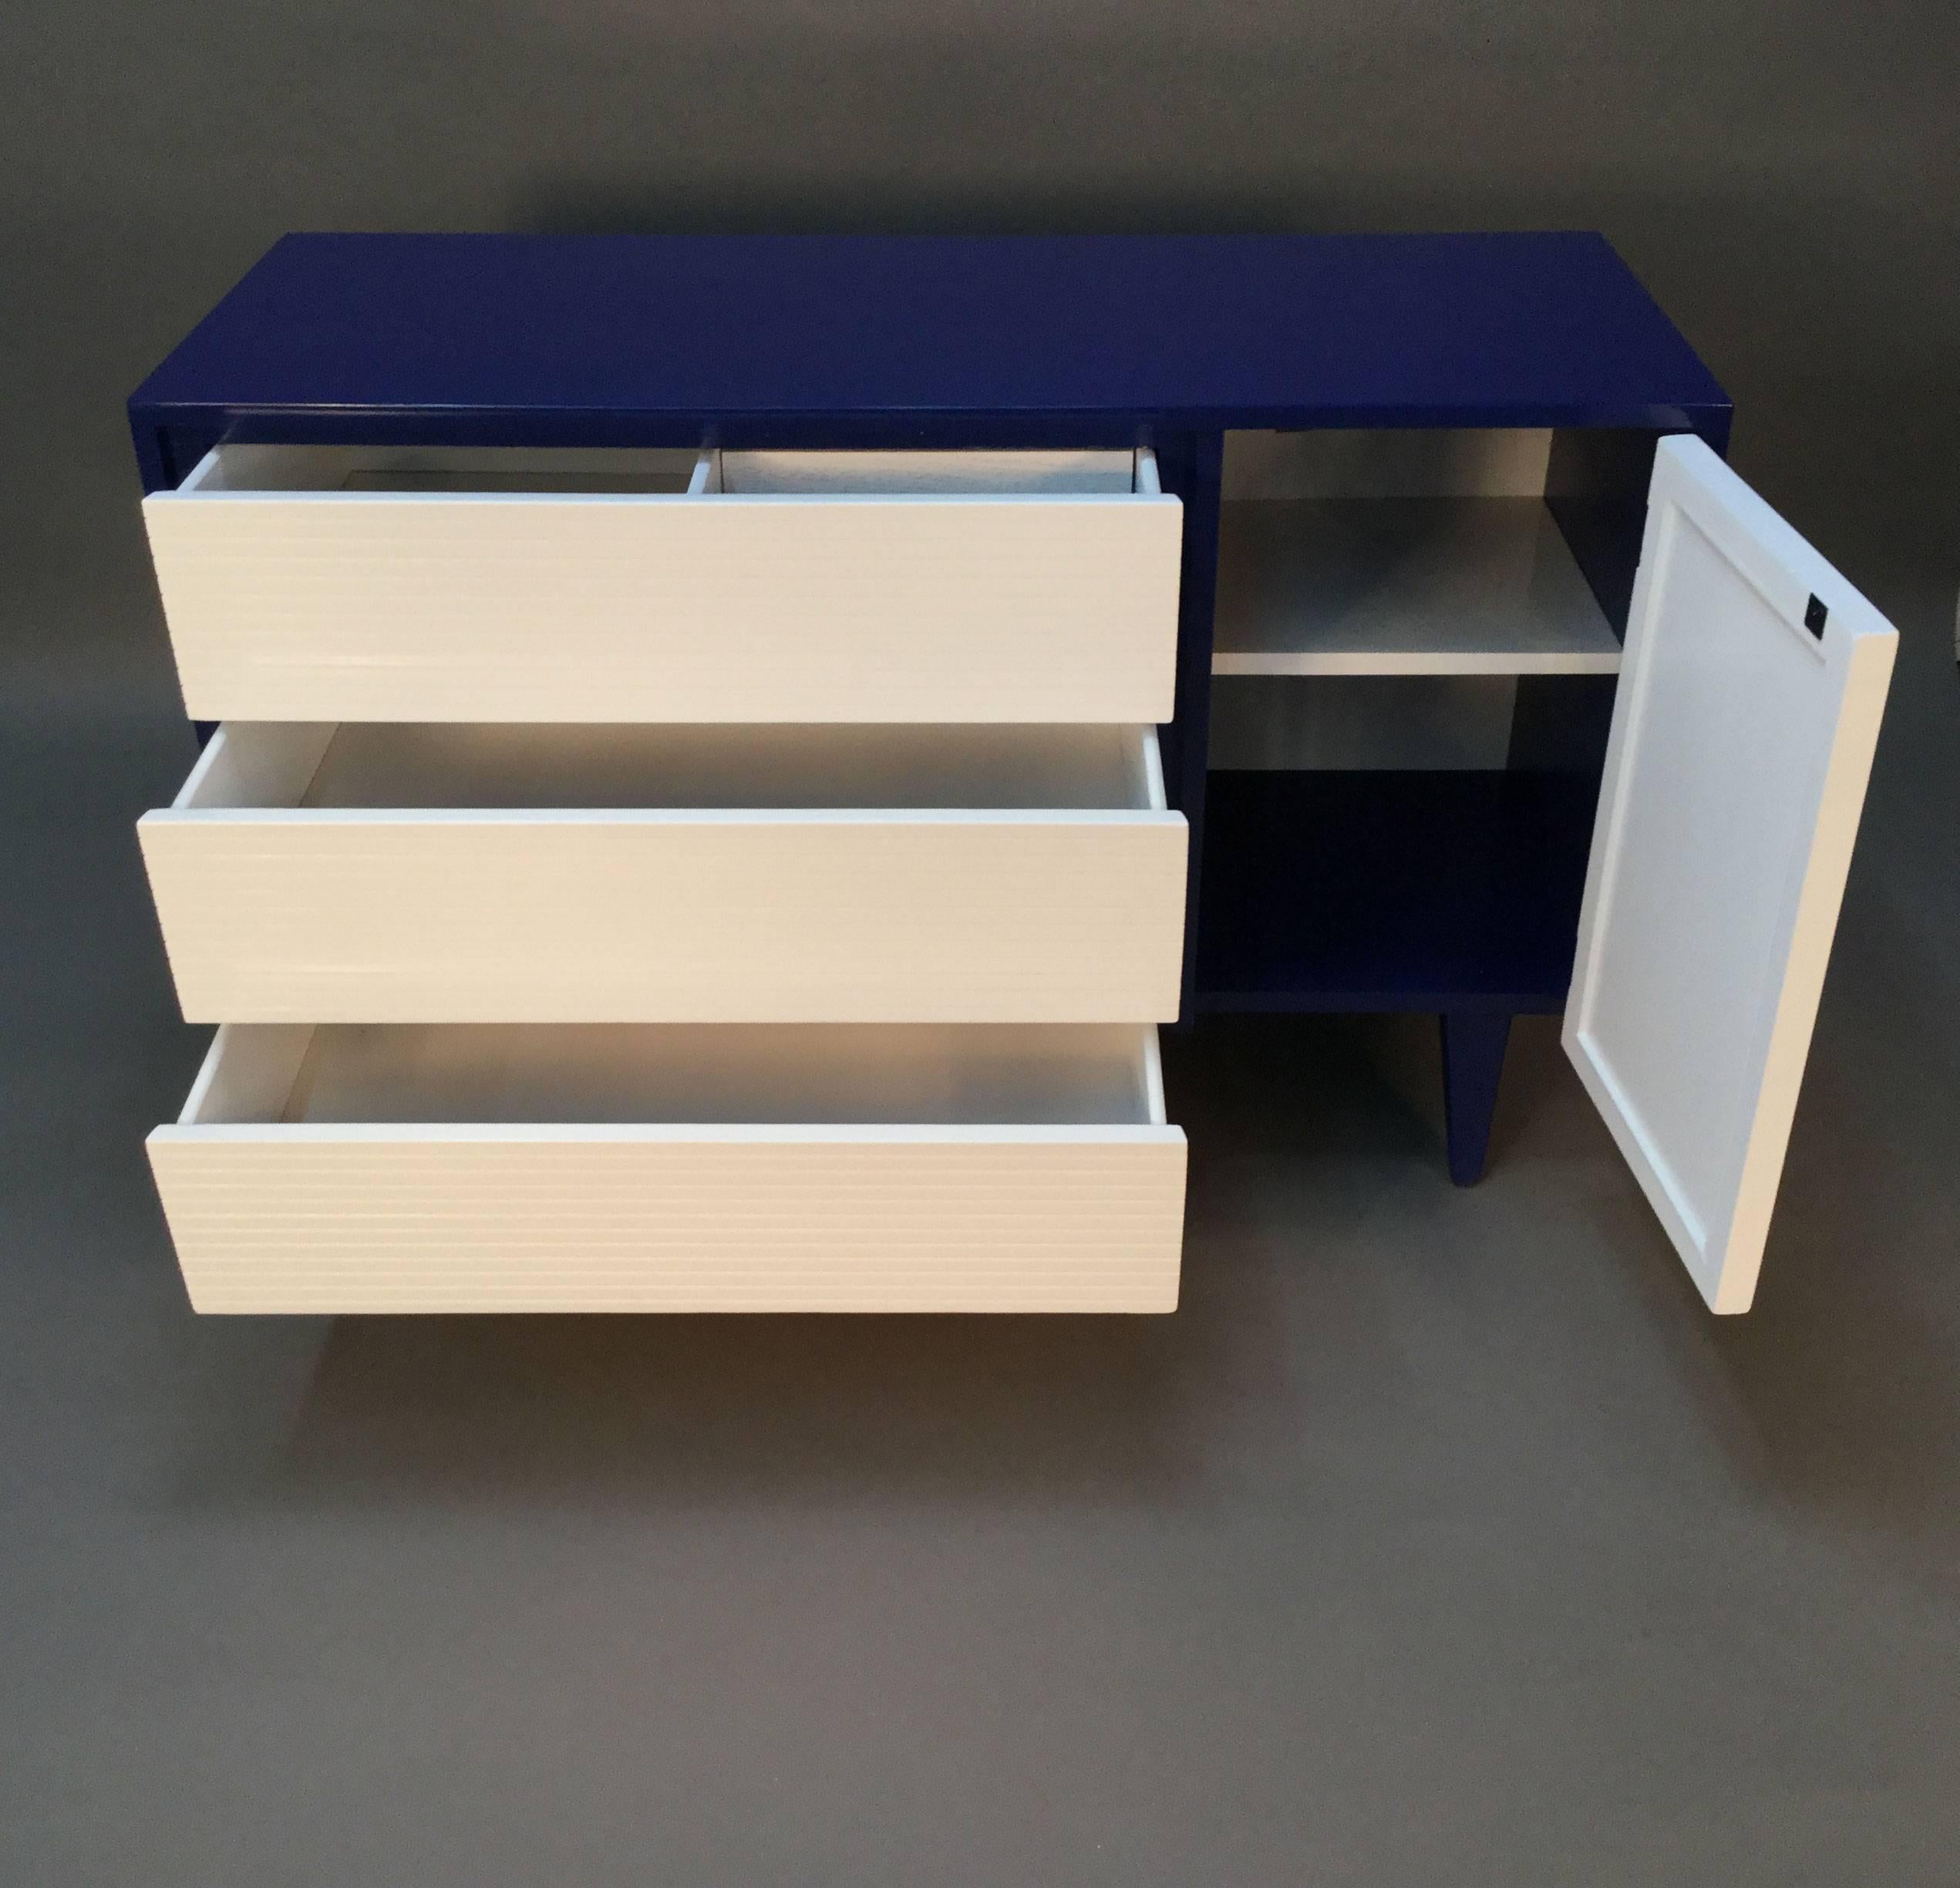 Newly lacquered in two-tone navy and white front. Three-drawer chest with cabinet.